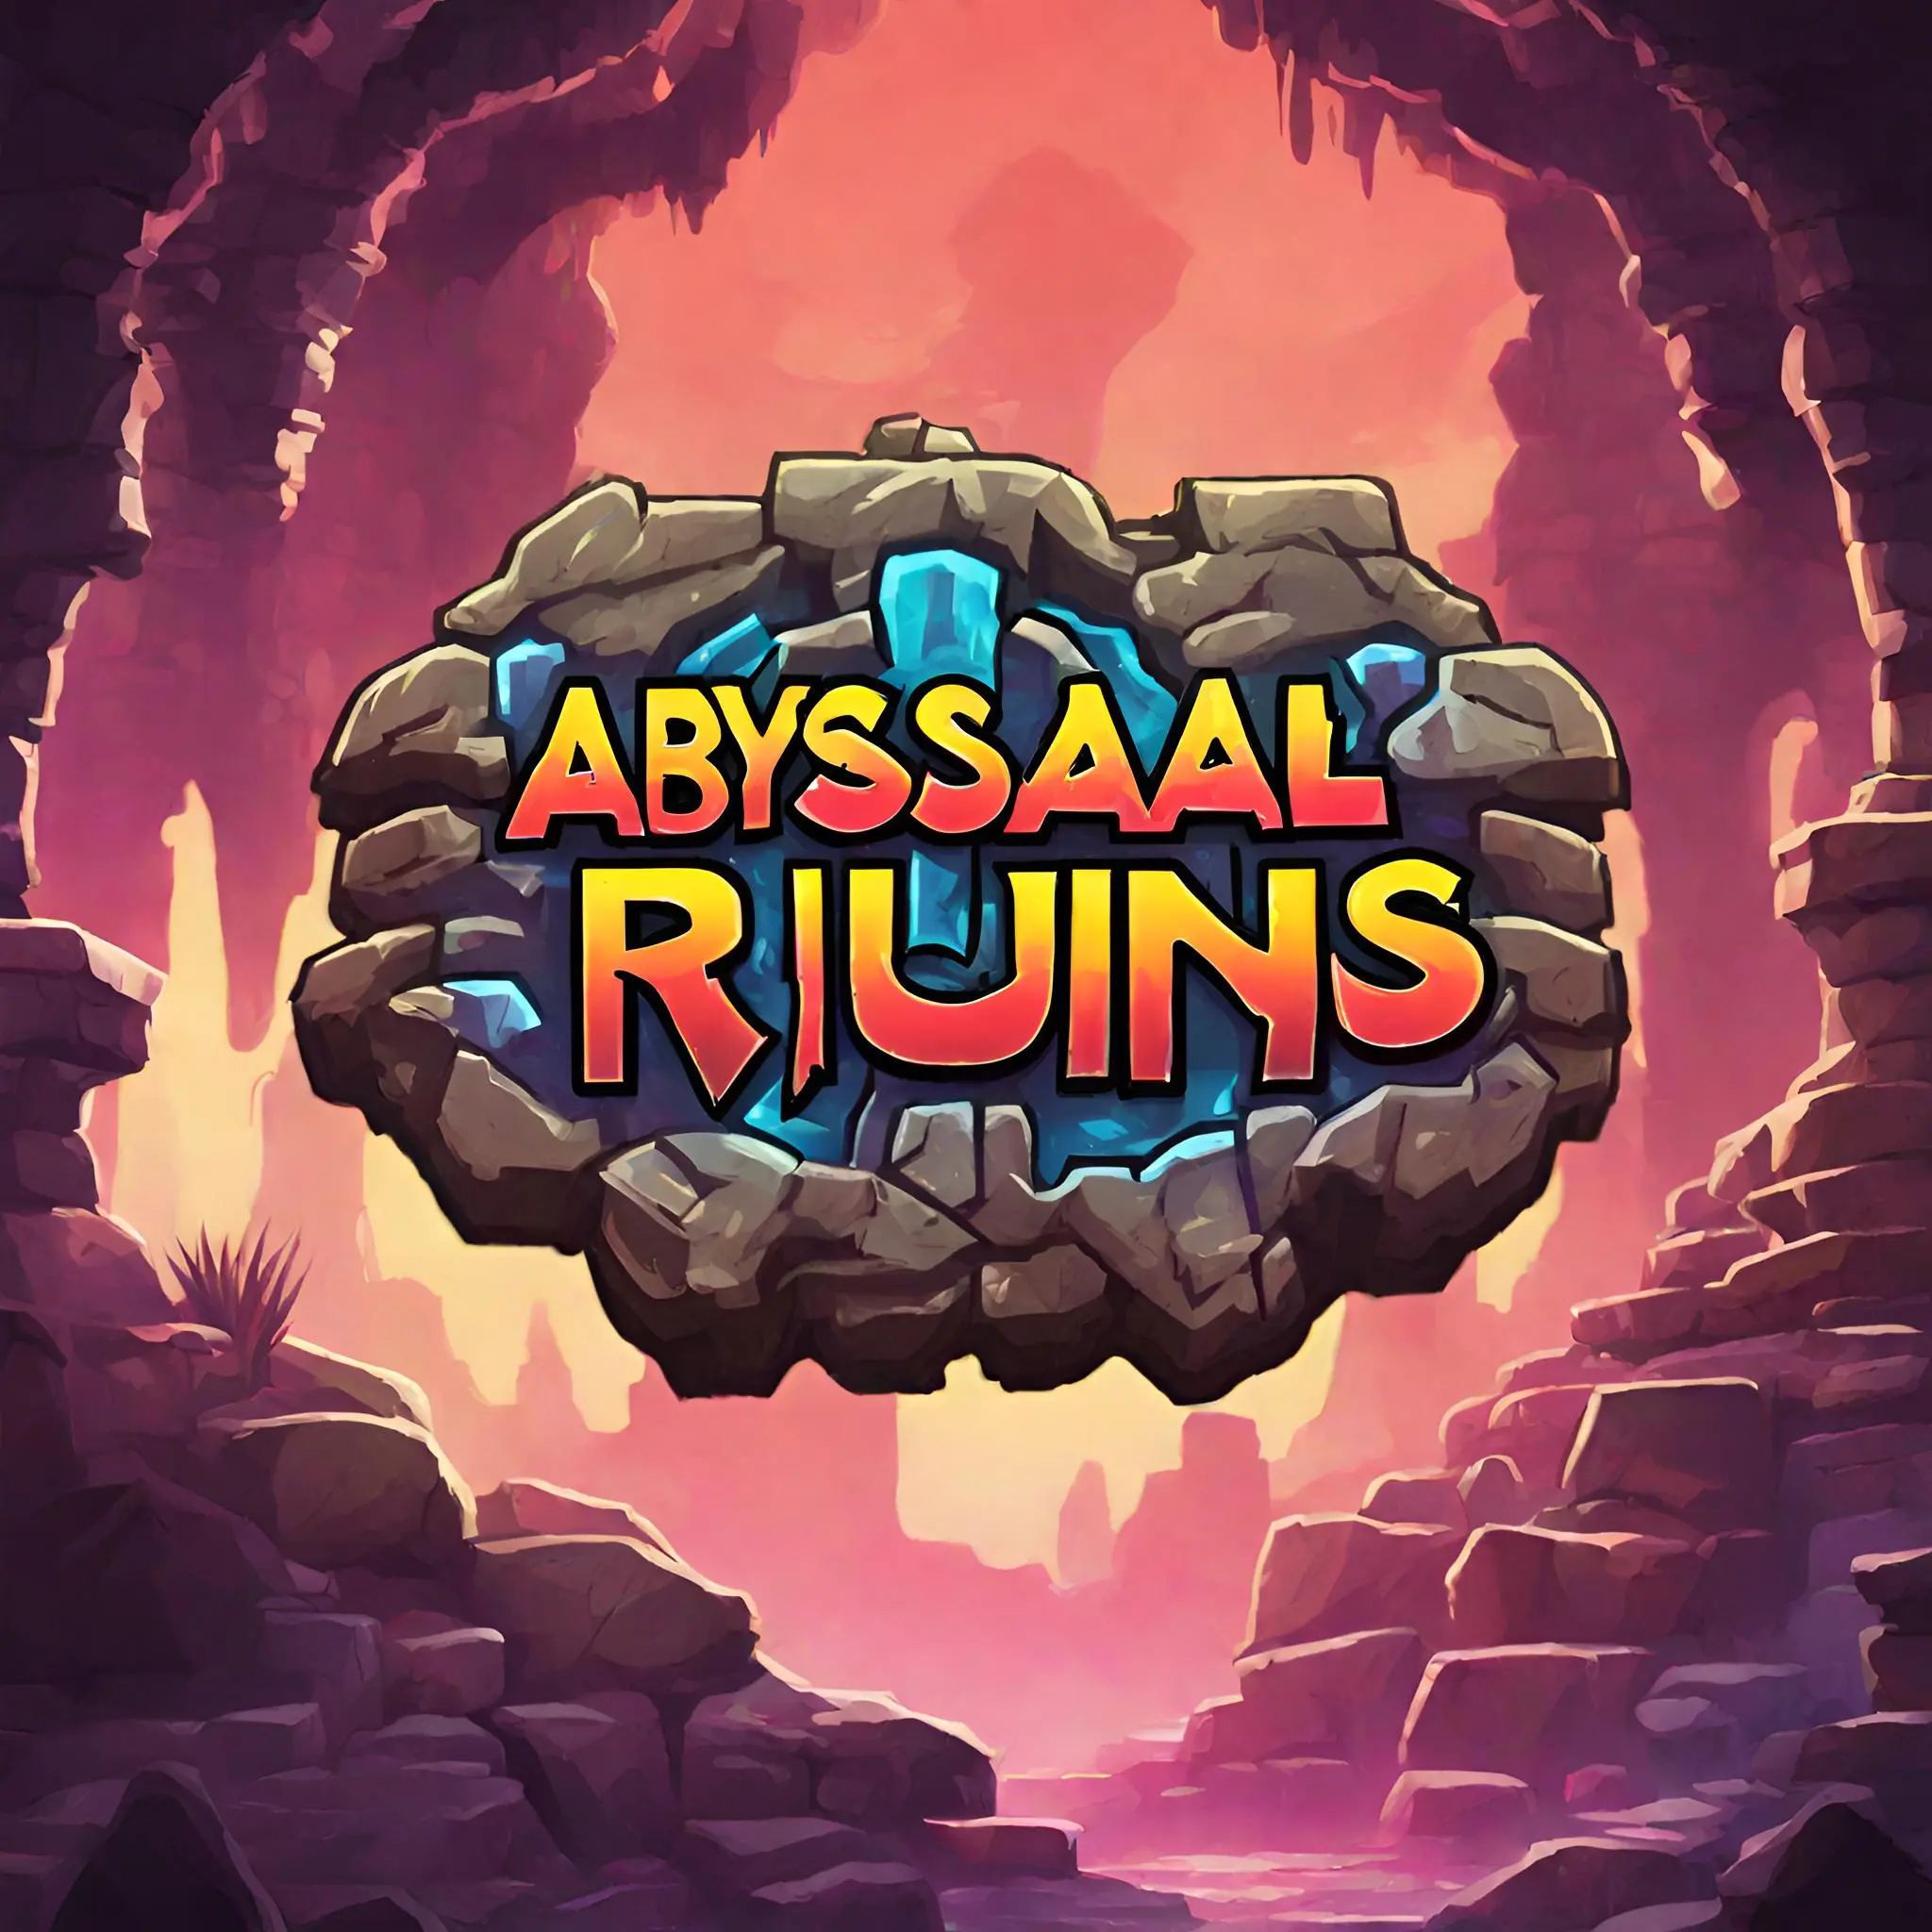 Abyssal Ruins